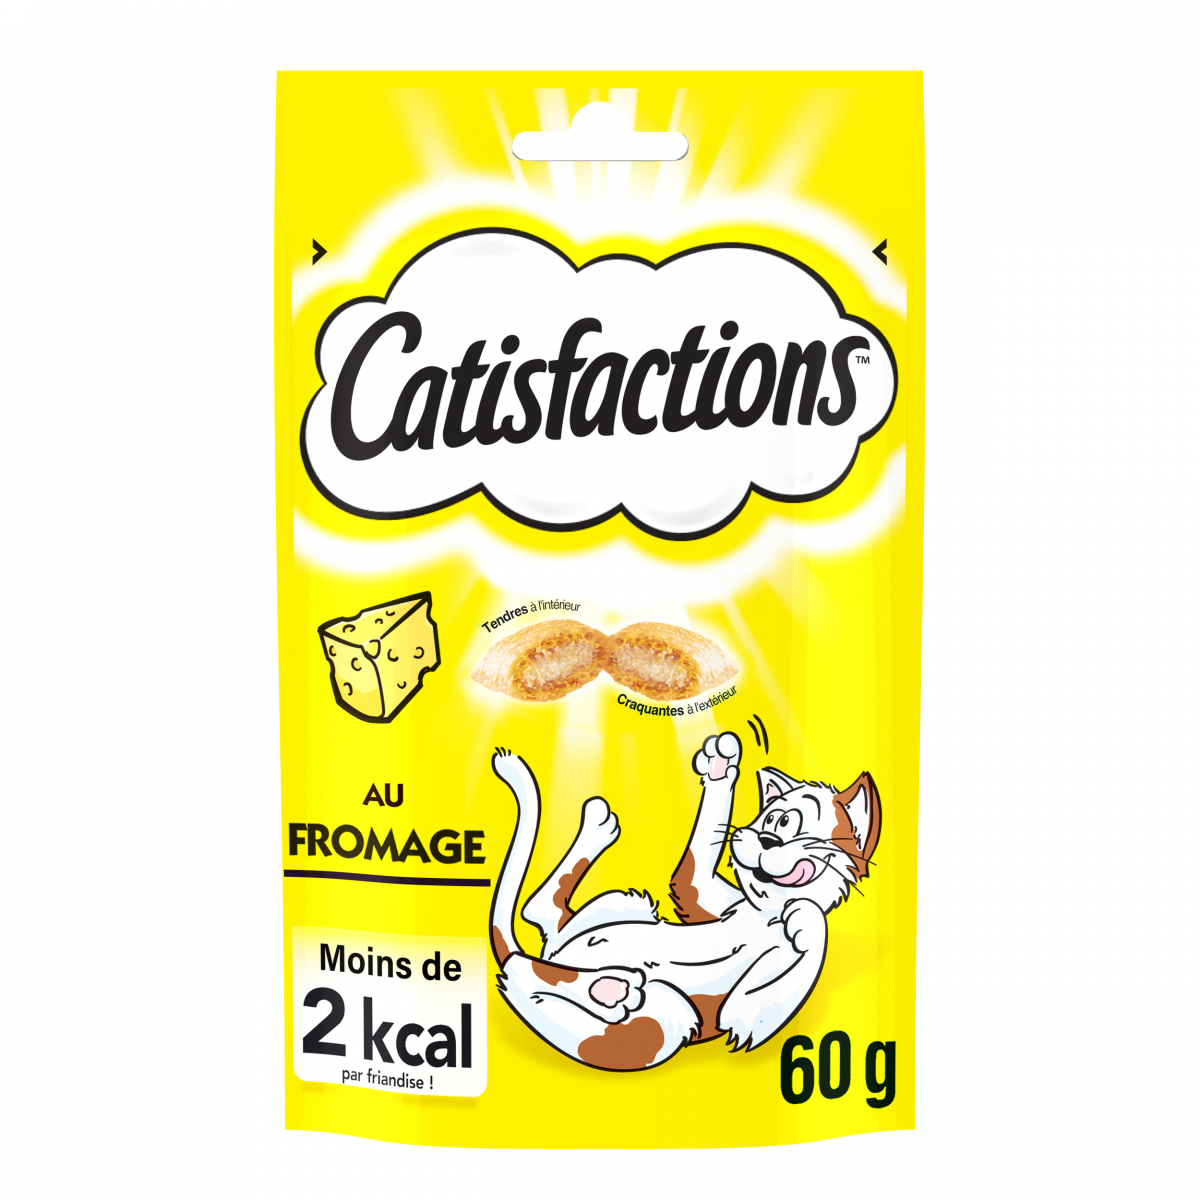 Friandises Catisfactions au Fromage pour chat et chaton